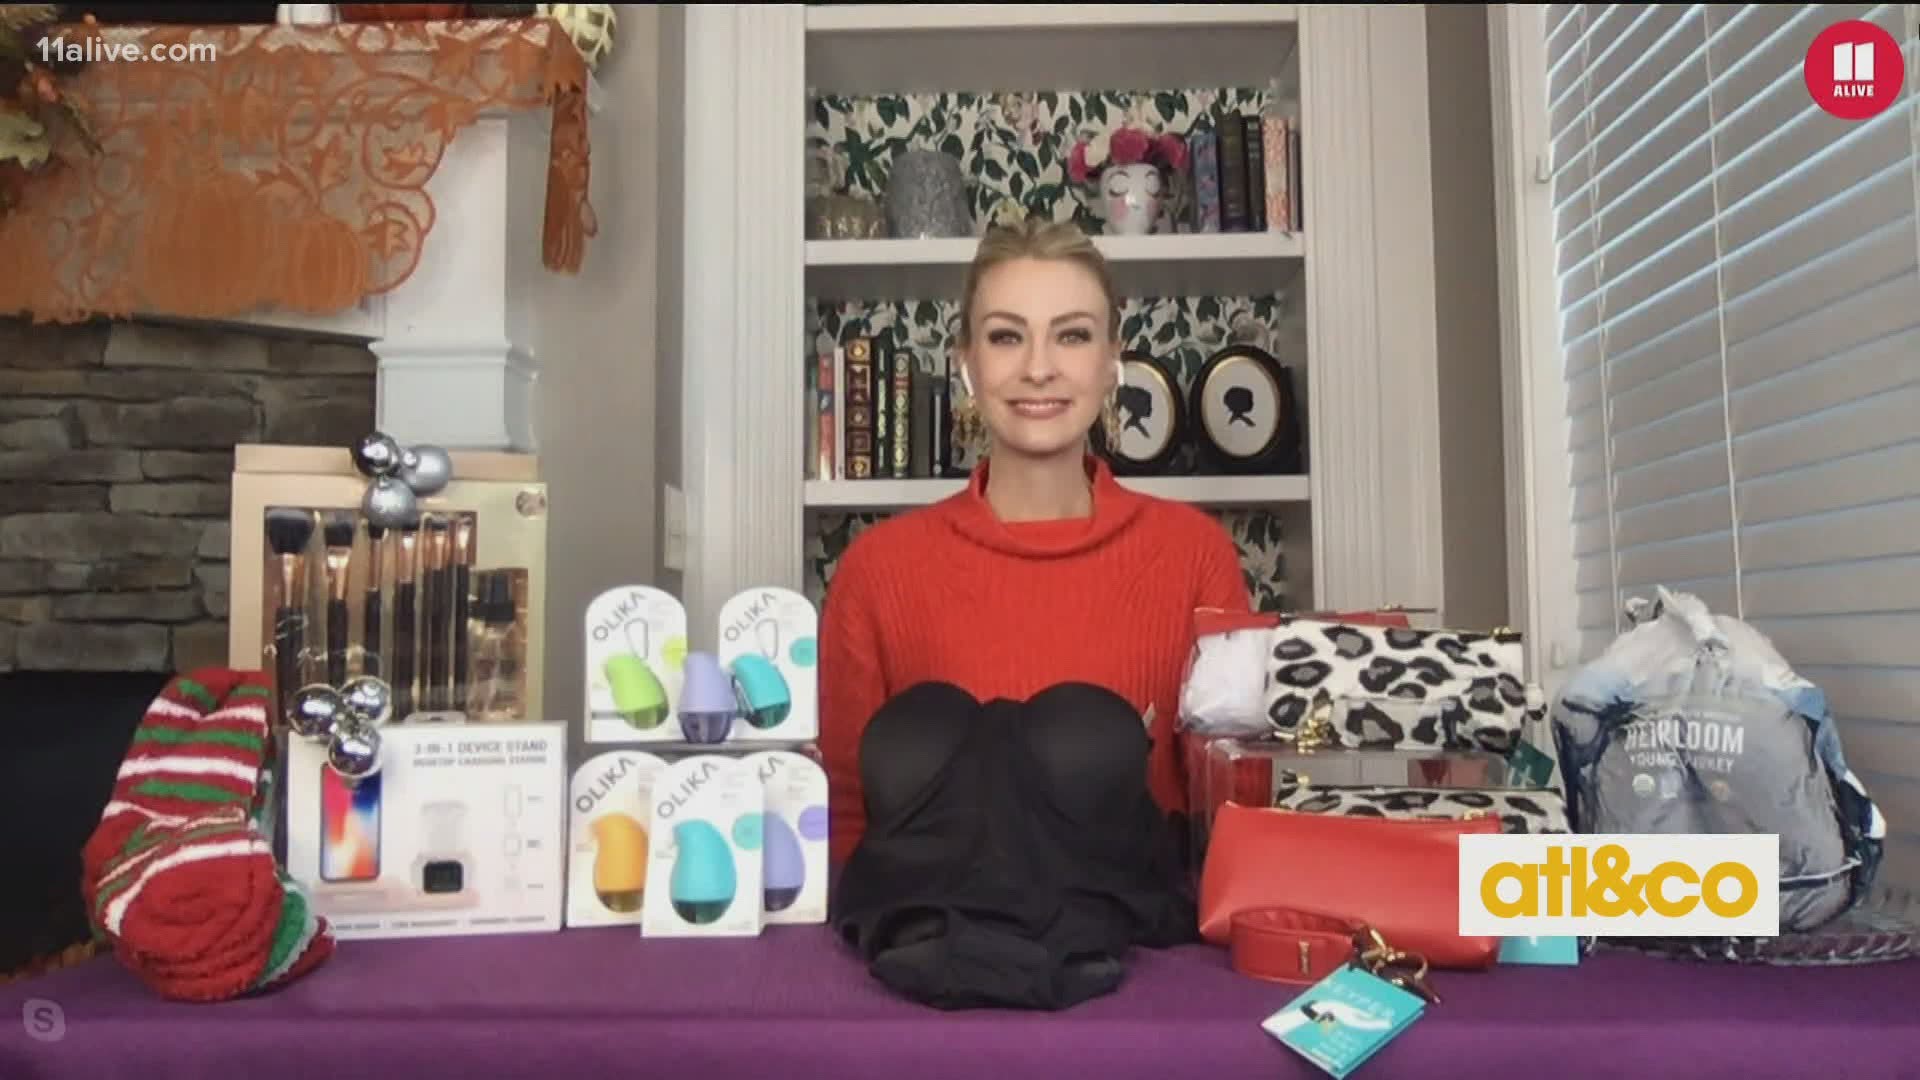 Lifestyle expert Emily Foley shares her top holiday finds from Burlington, OLIKA Hydrating Hand Sanitizer, Maidenform, KEYPER, and Farmer Focus.